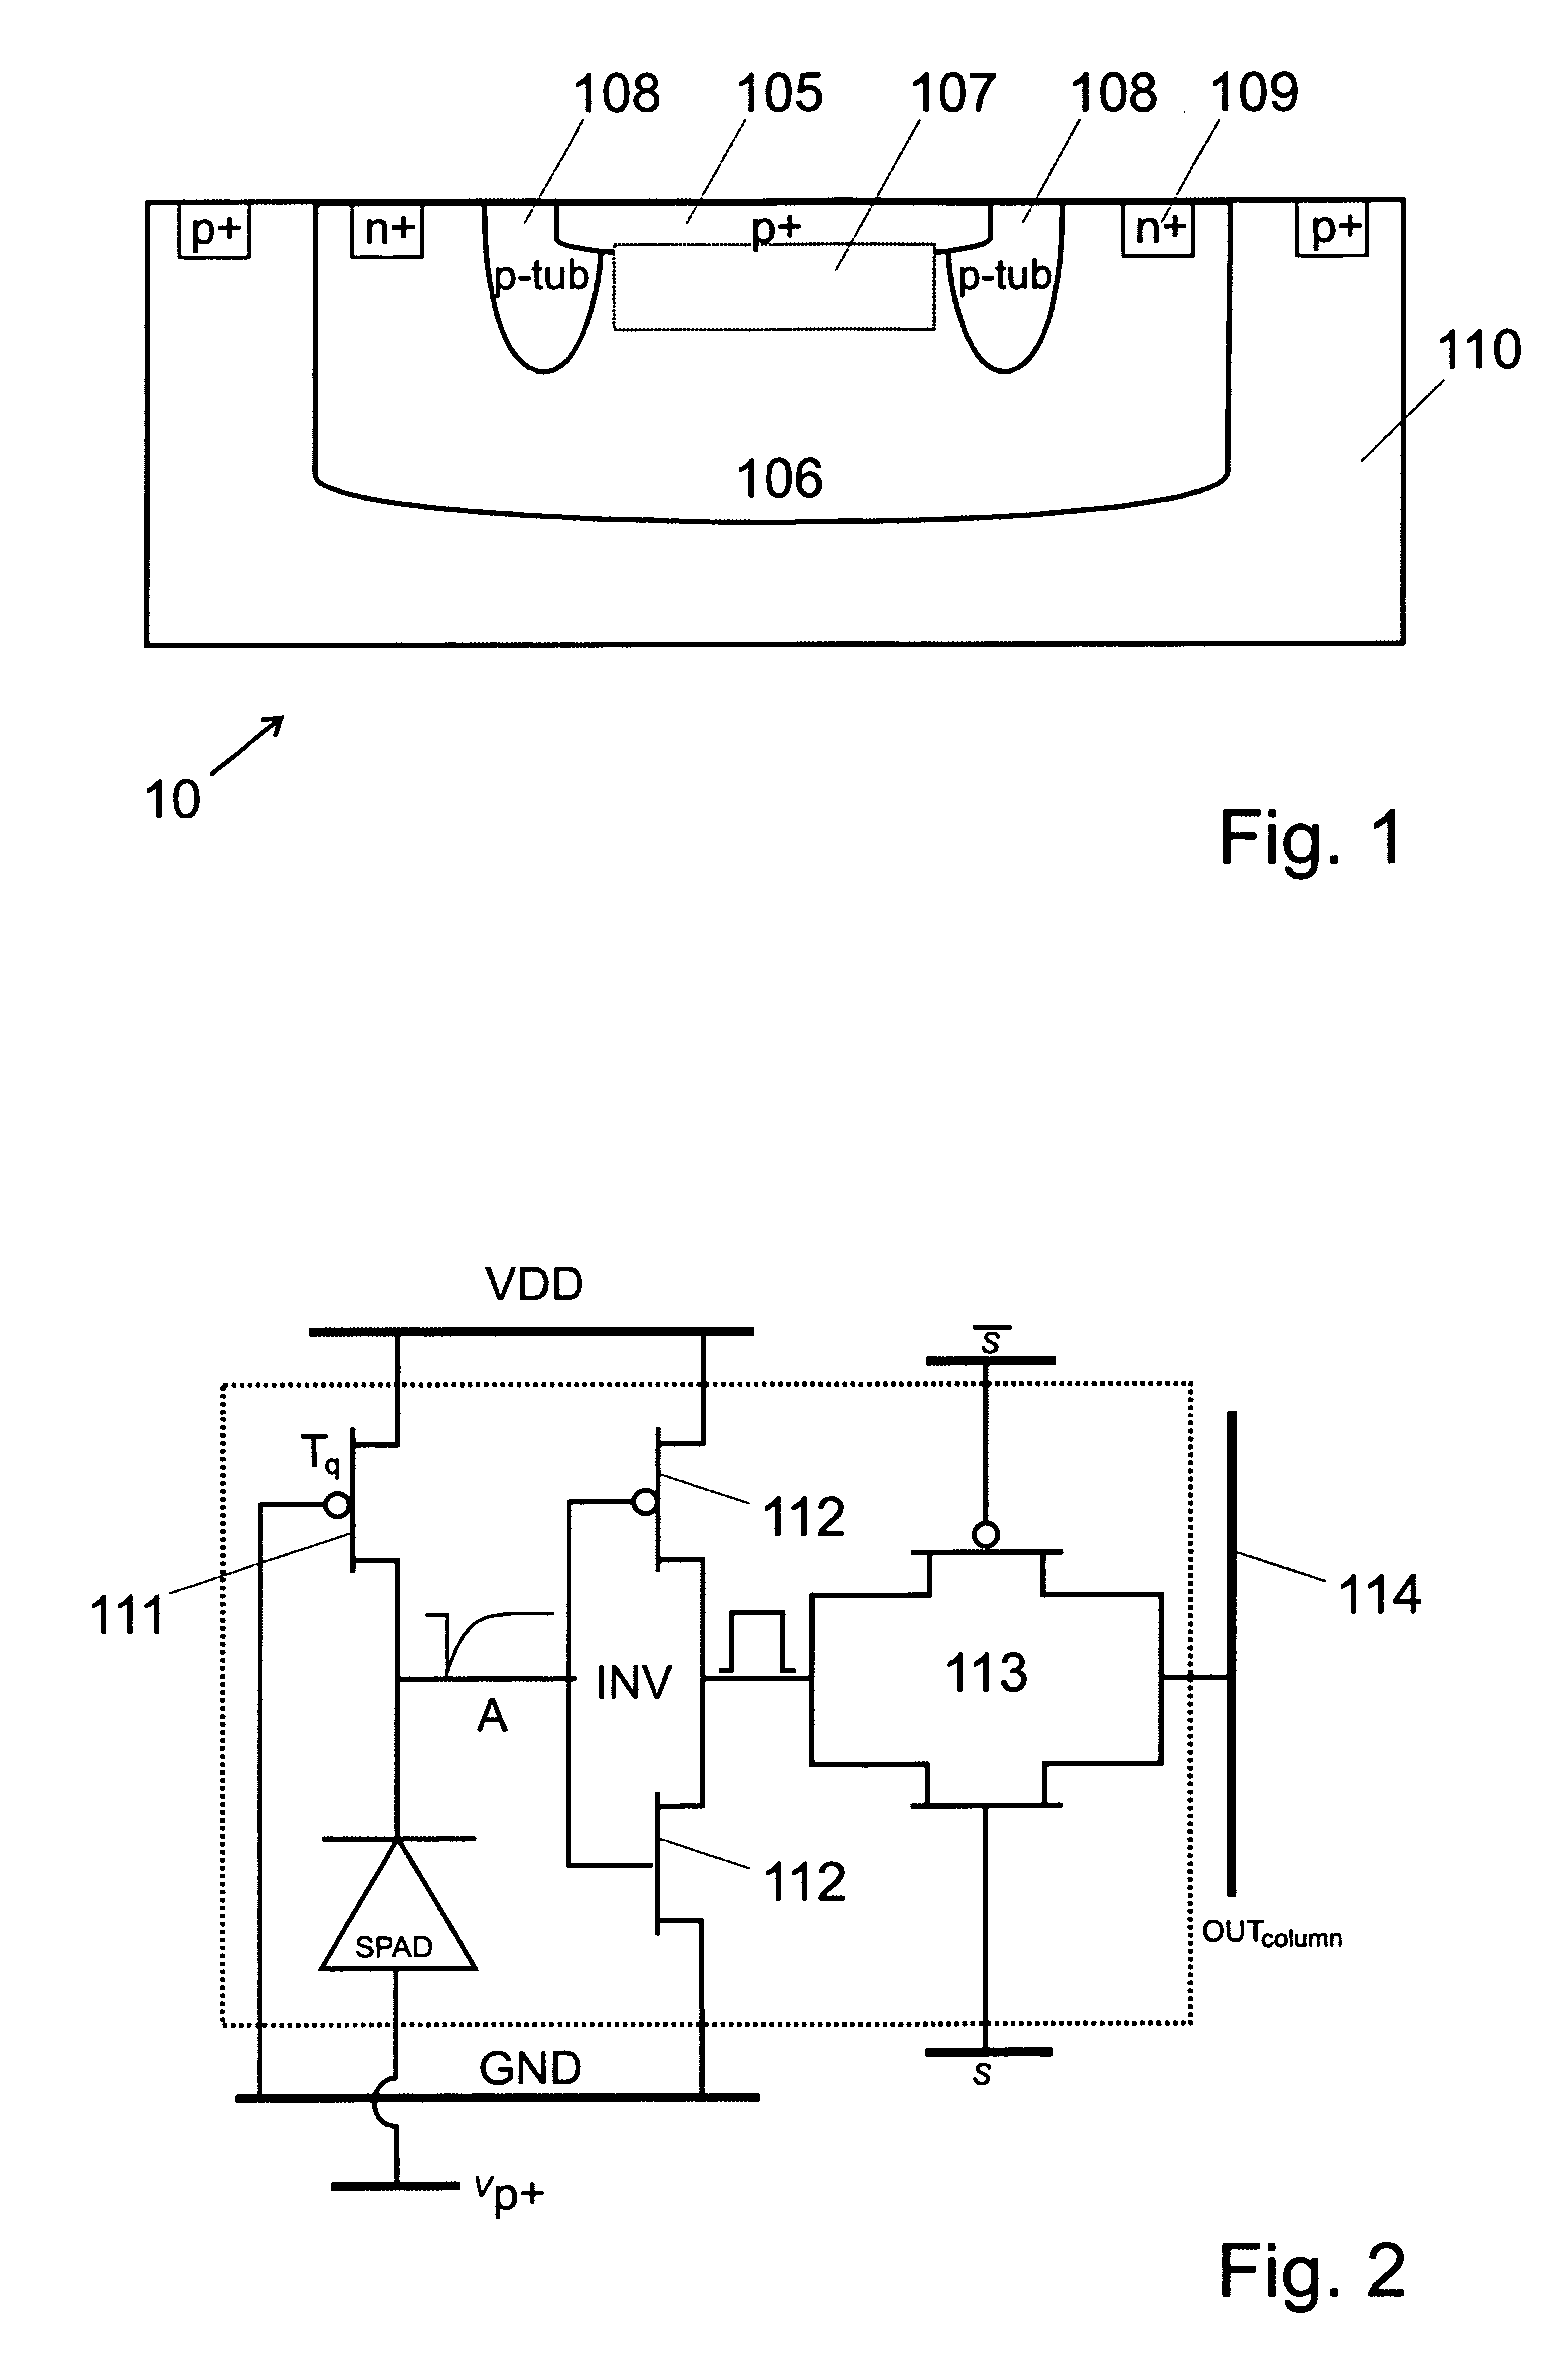 Integrated imager circuit comprising a monolithic array of single photon avalanche diodes